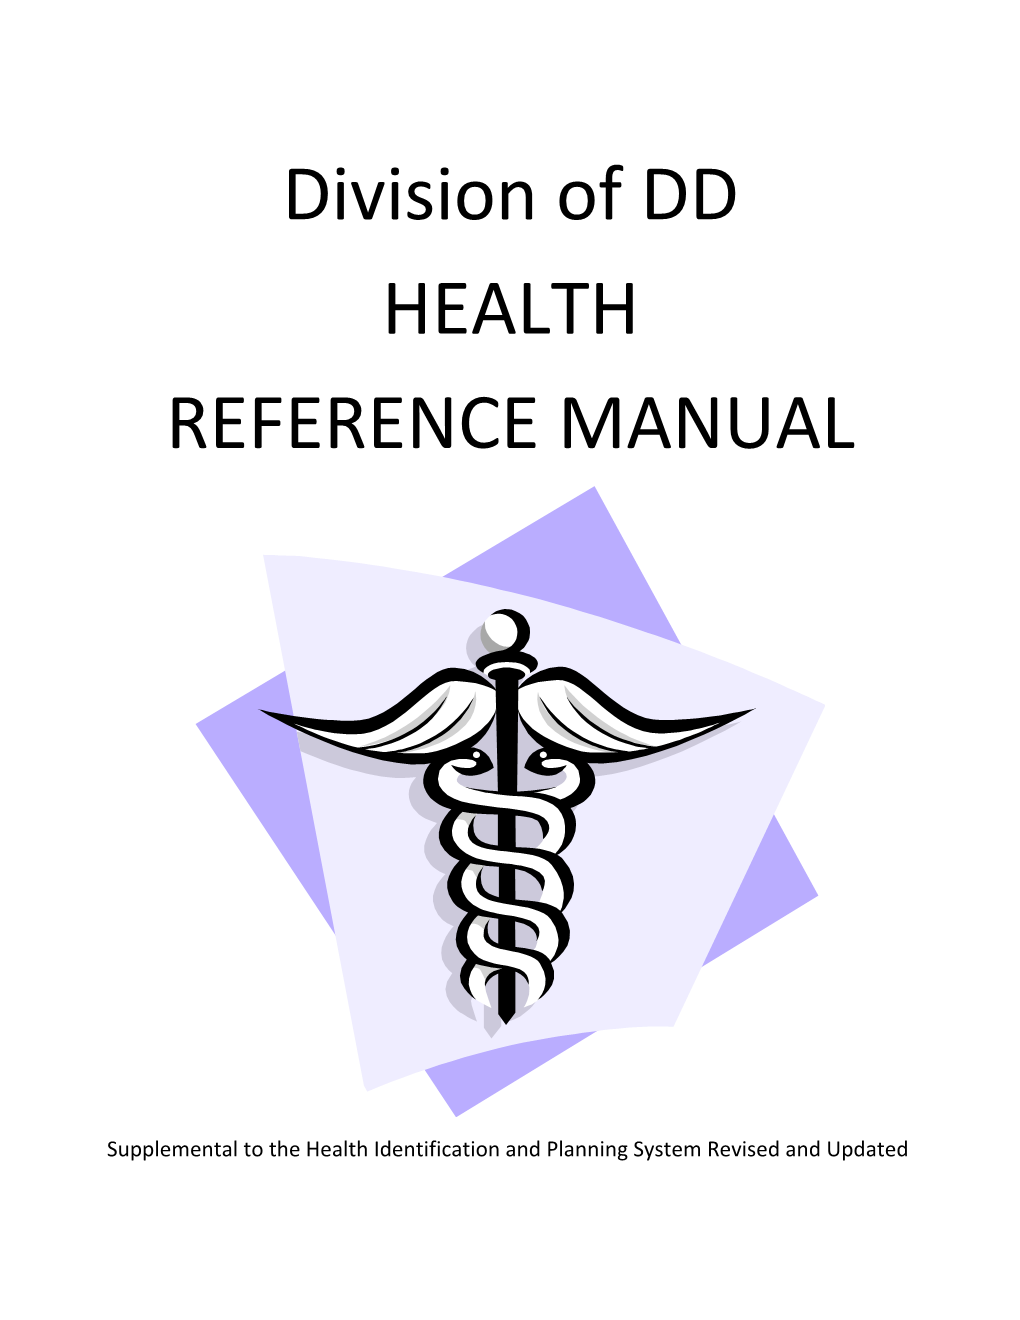 Supplemental to the Health Identification and Planning Systemrevised and Updated